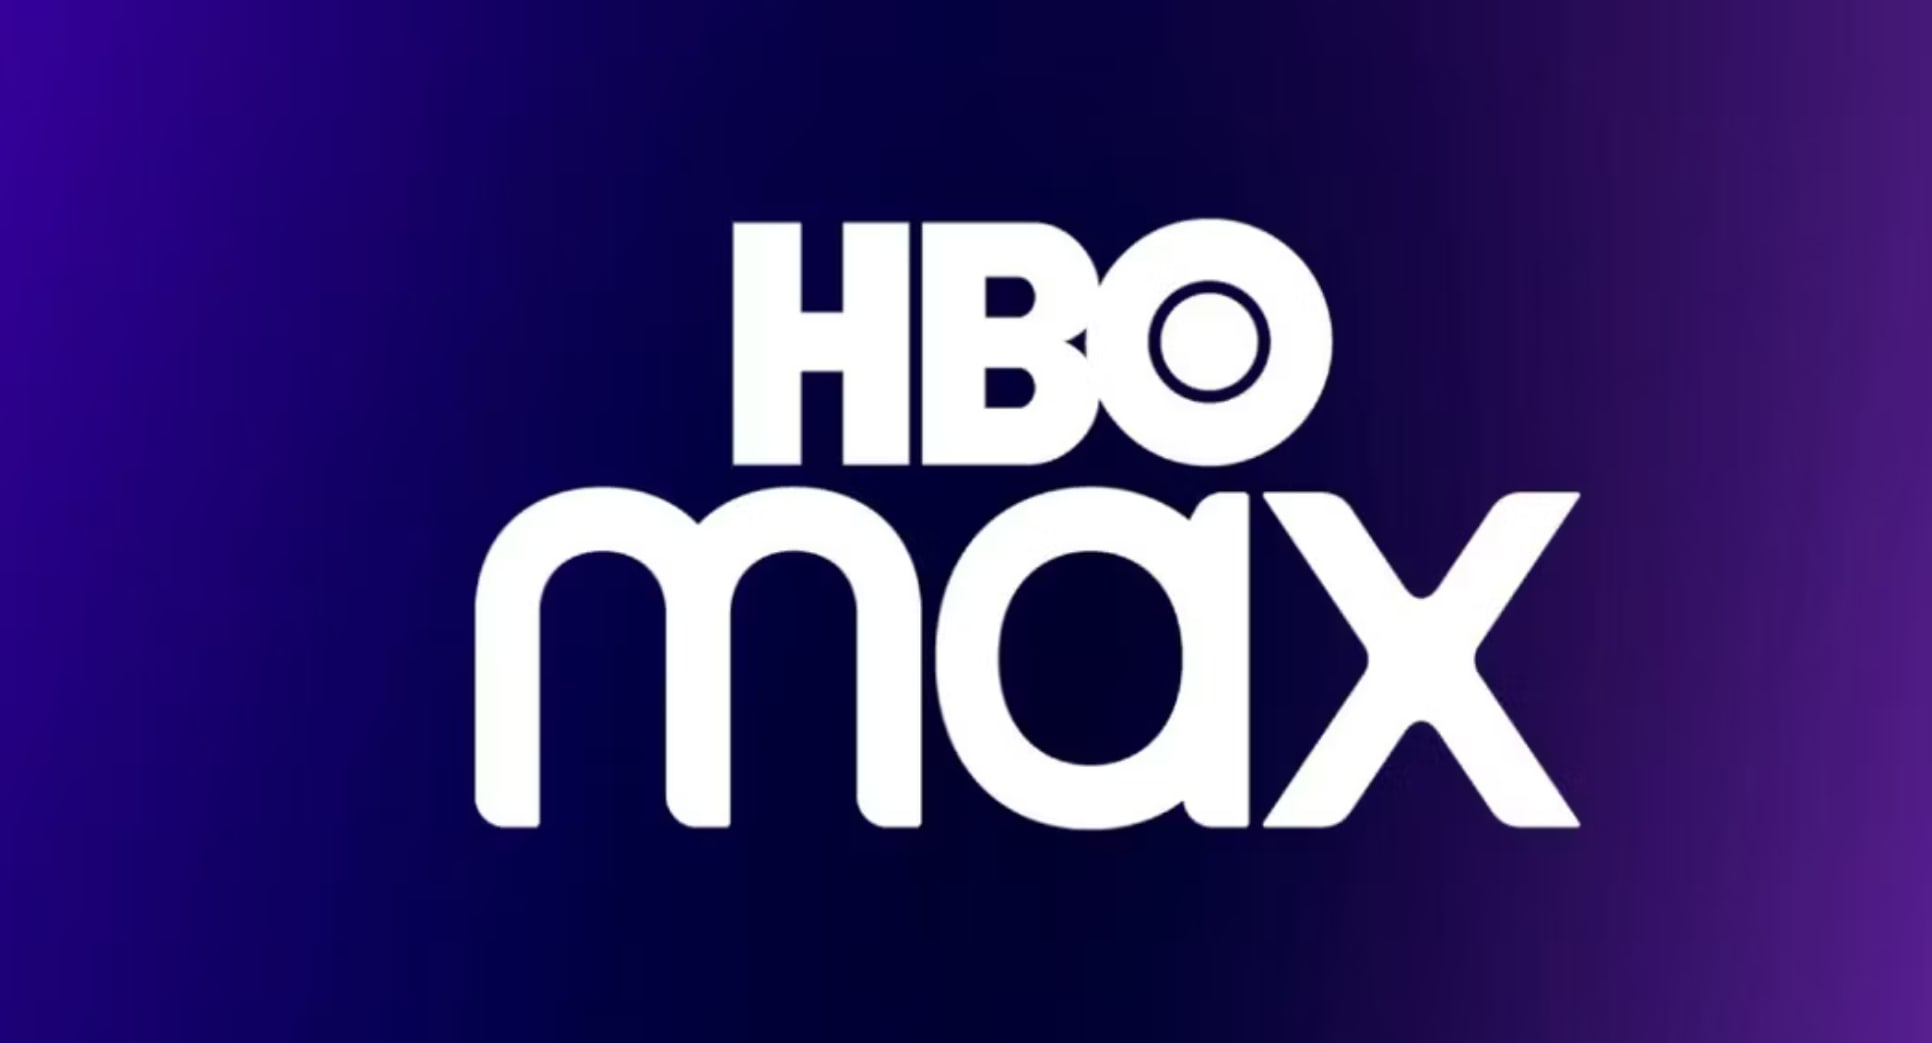 Three design updates to elevate the app experience for HBO Max, by Frank  W.